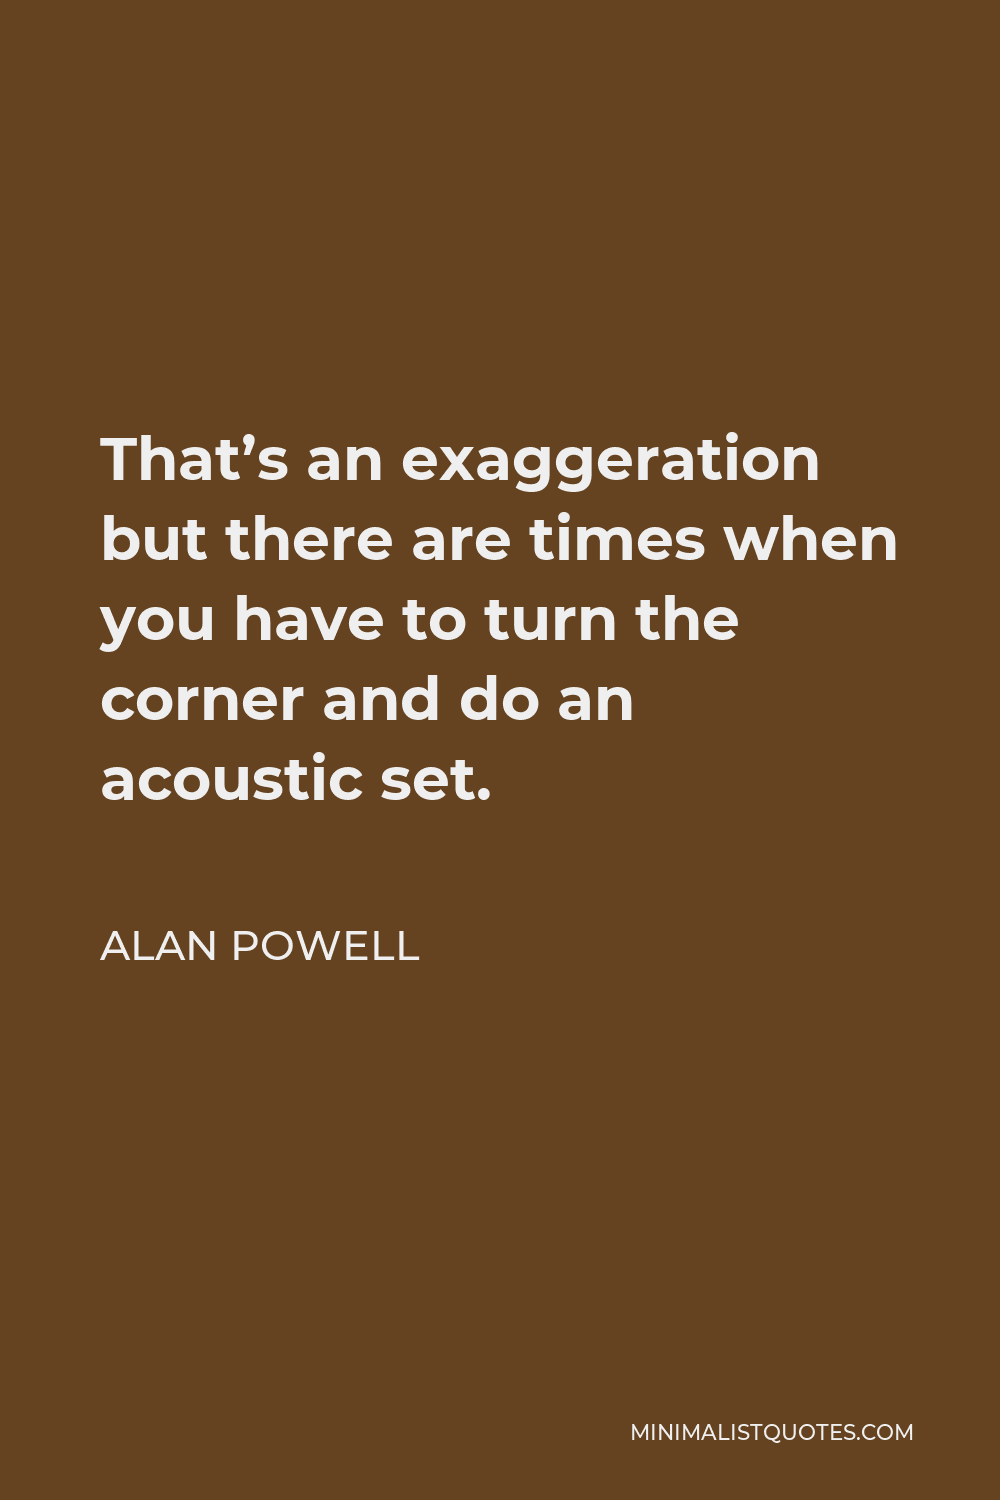 Alan Powell Quote - That’s an exaggeration but there are times when you have to turn the corner and do an acoustic set.